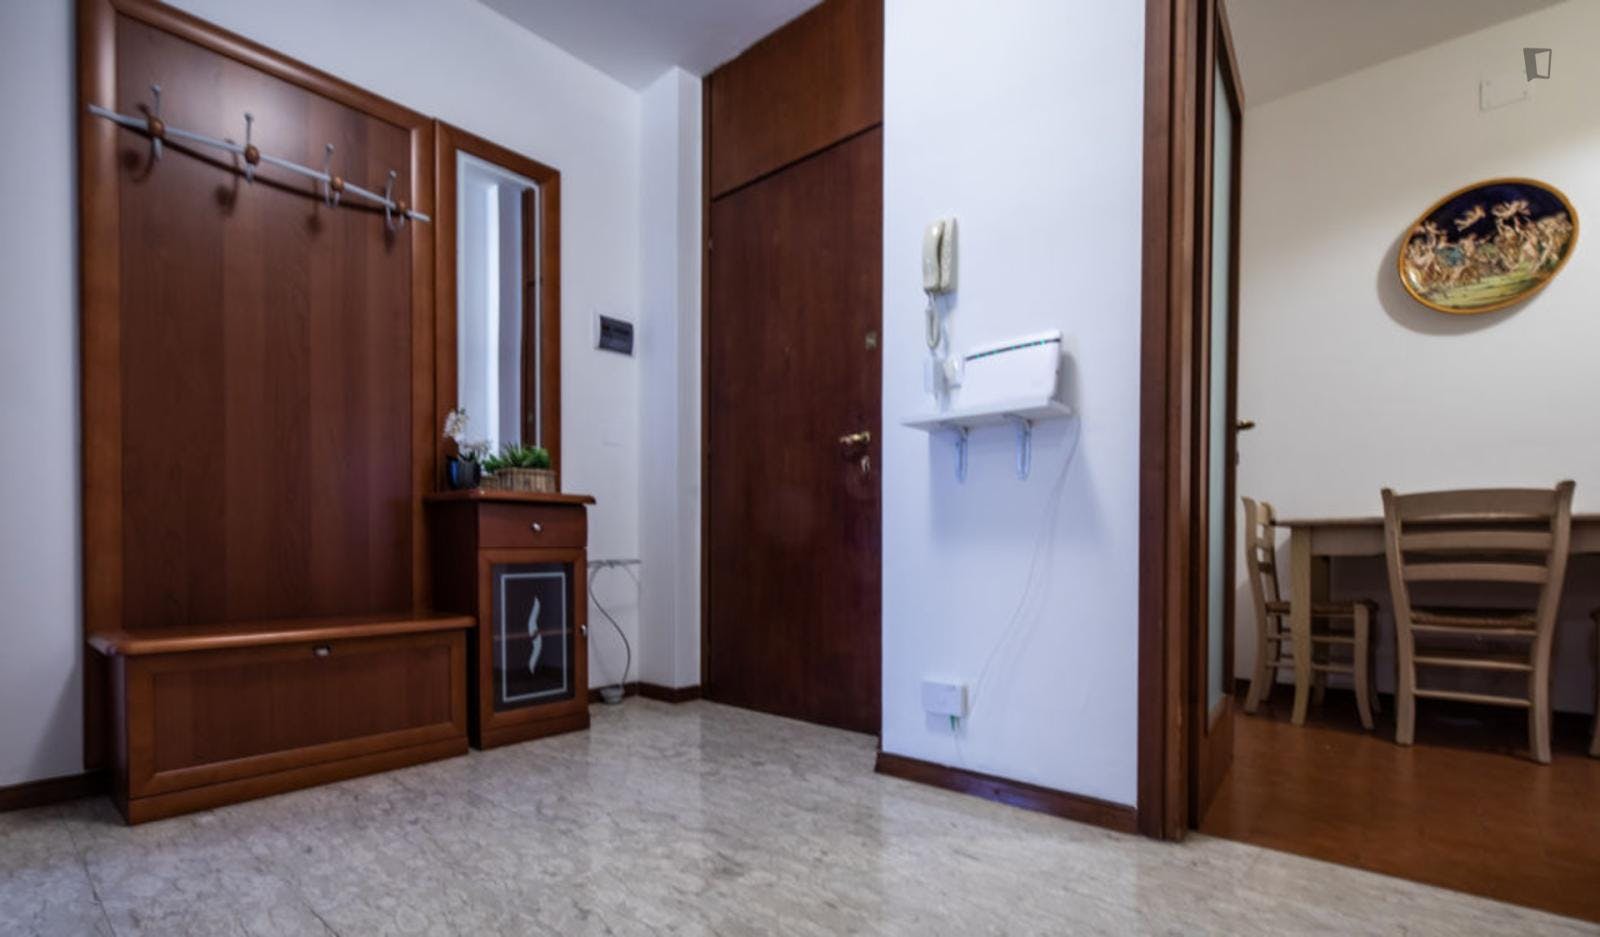 Charming 2-bedroom apartment in the centre of Udine